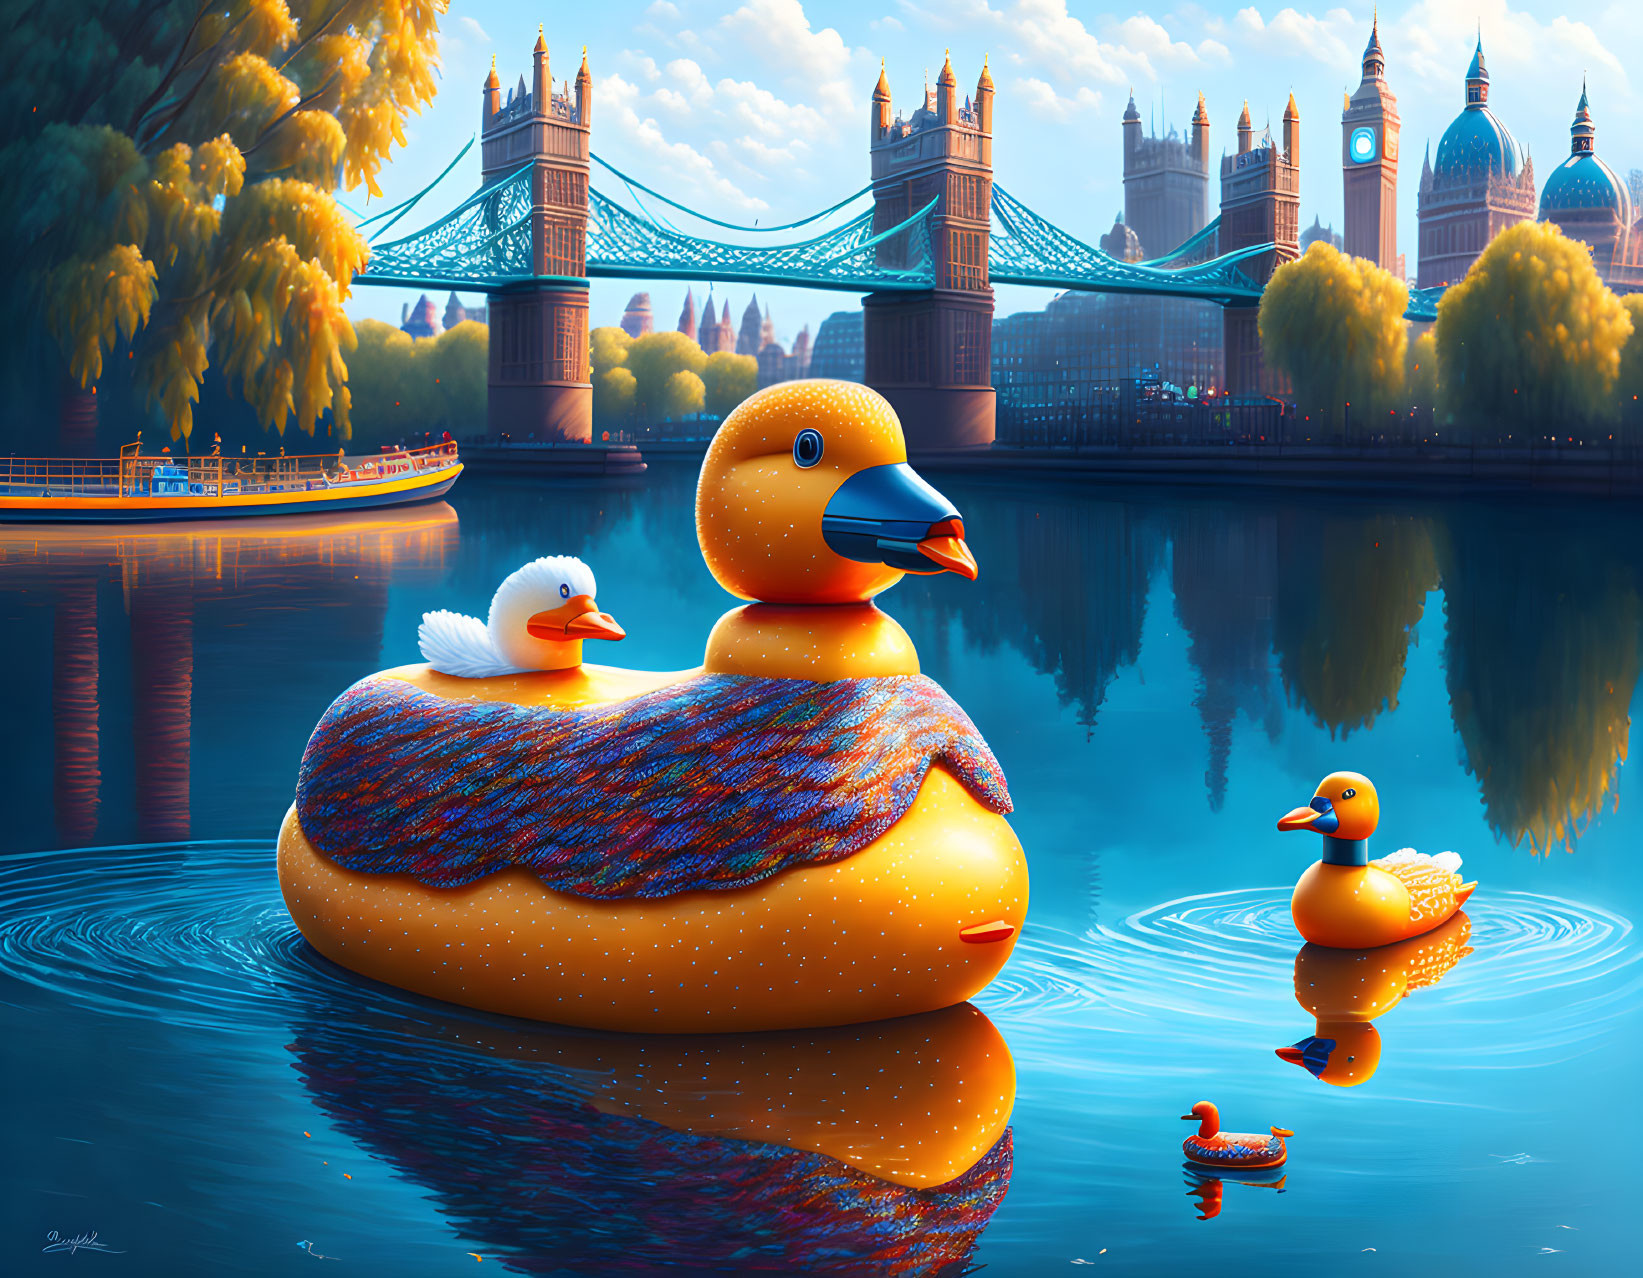 Giant Rubber Duck in Sweater Floats by Tower Bridge